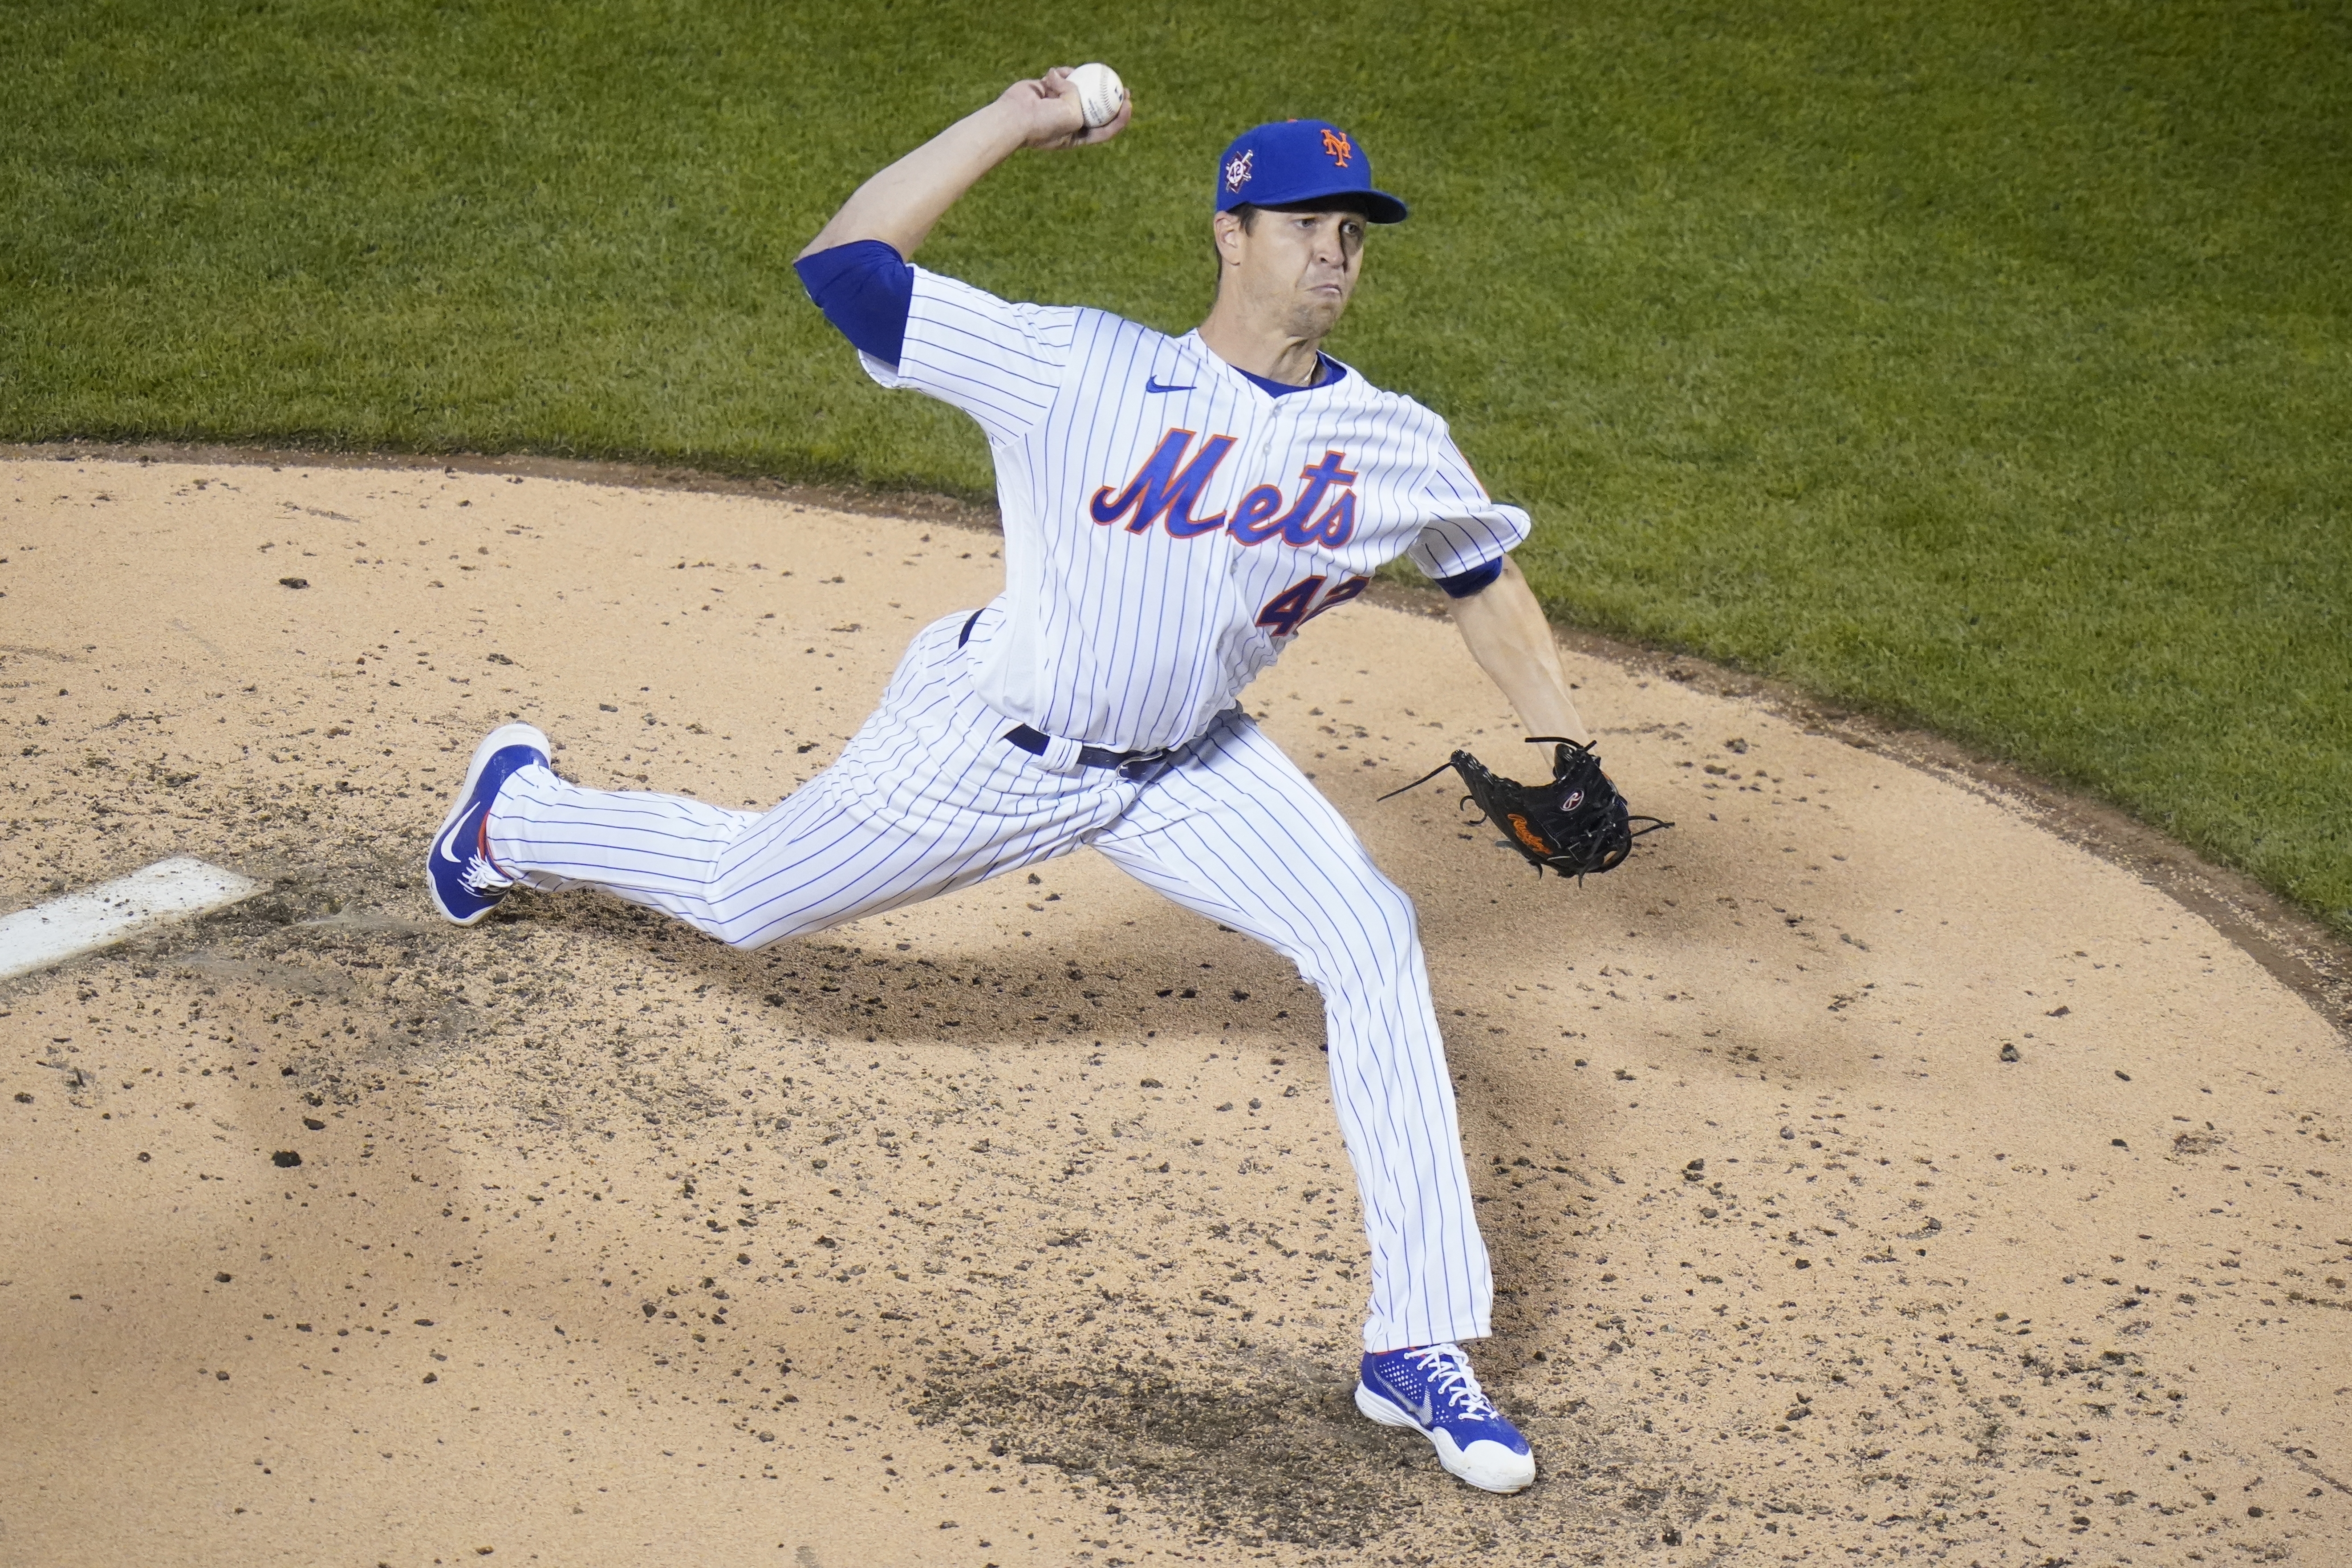 Jacob deGrom helps New York Mets win series finale against